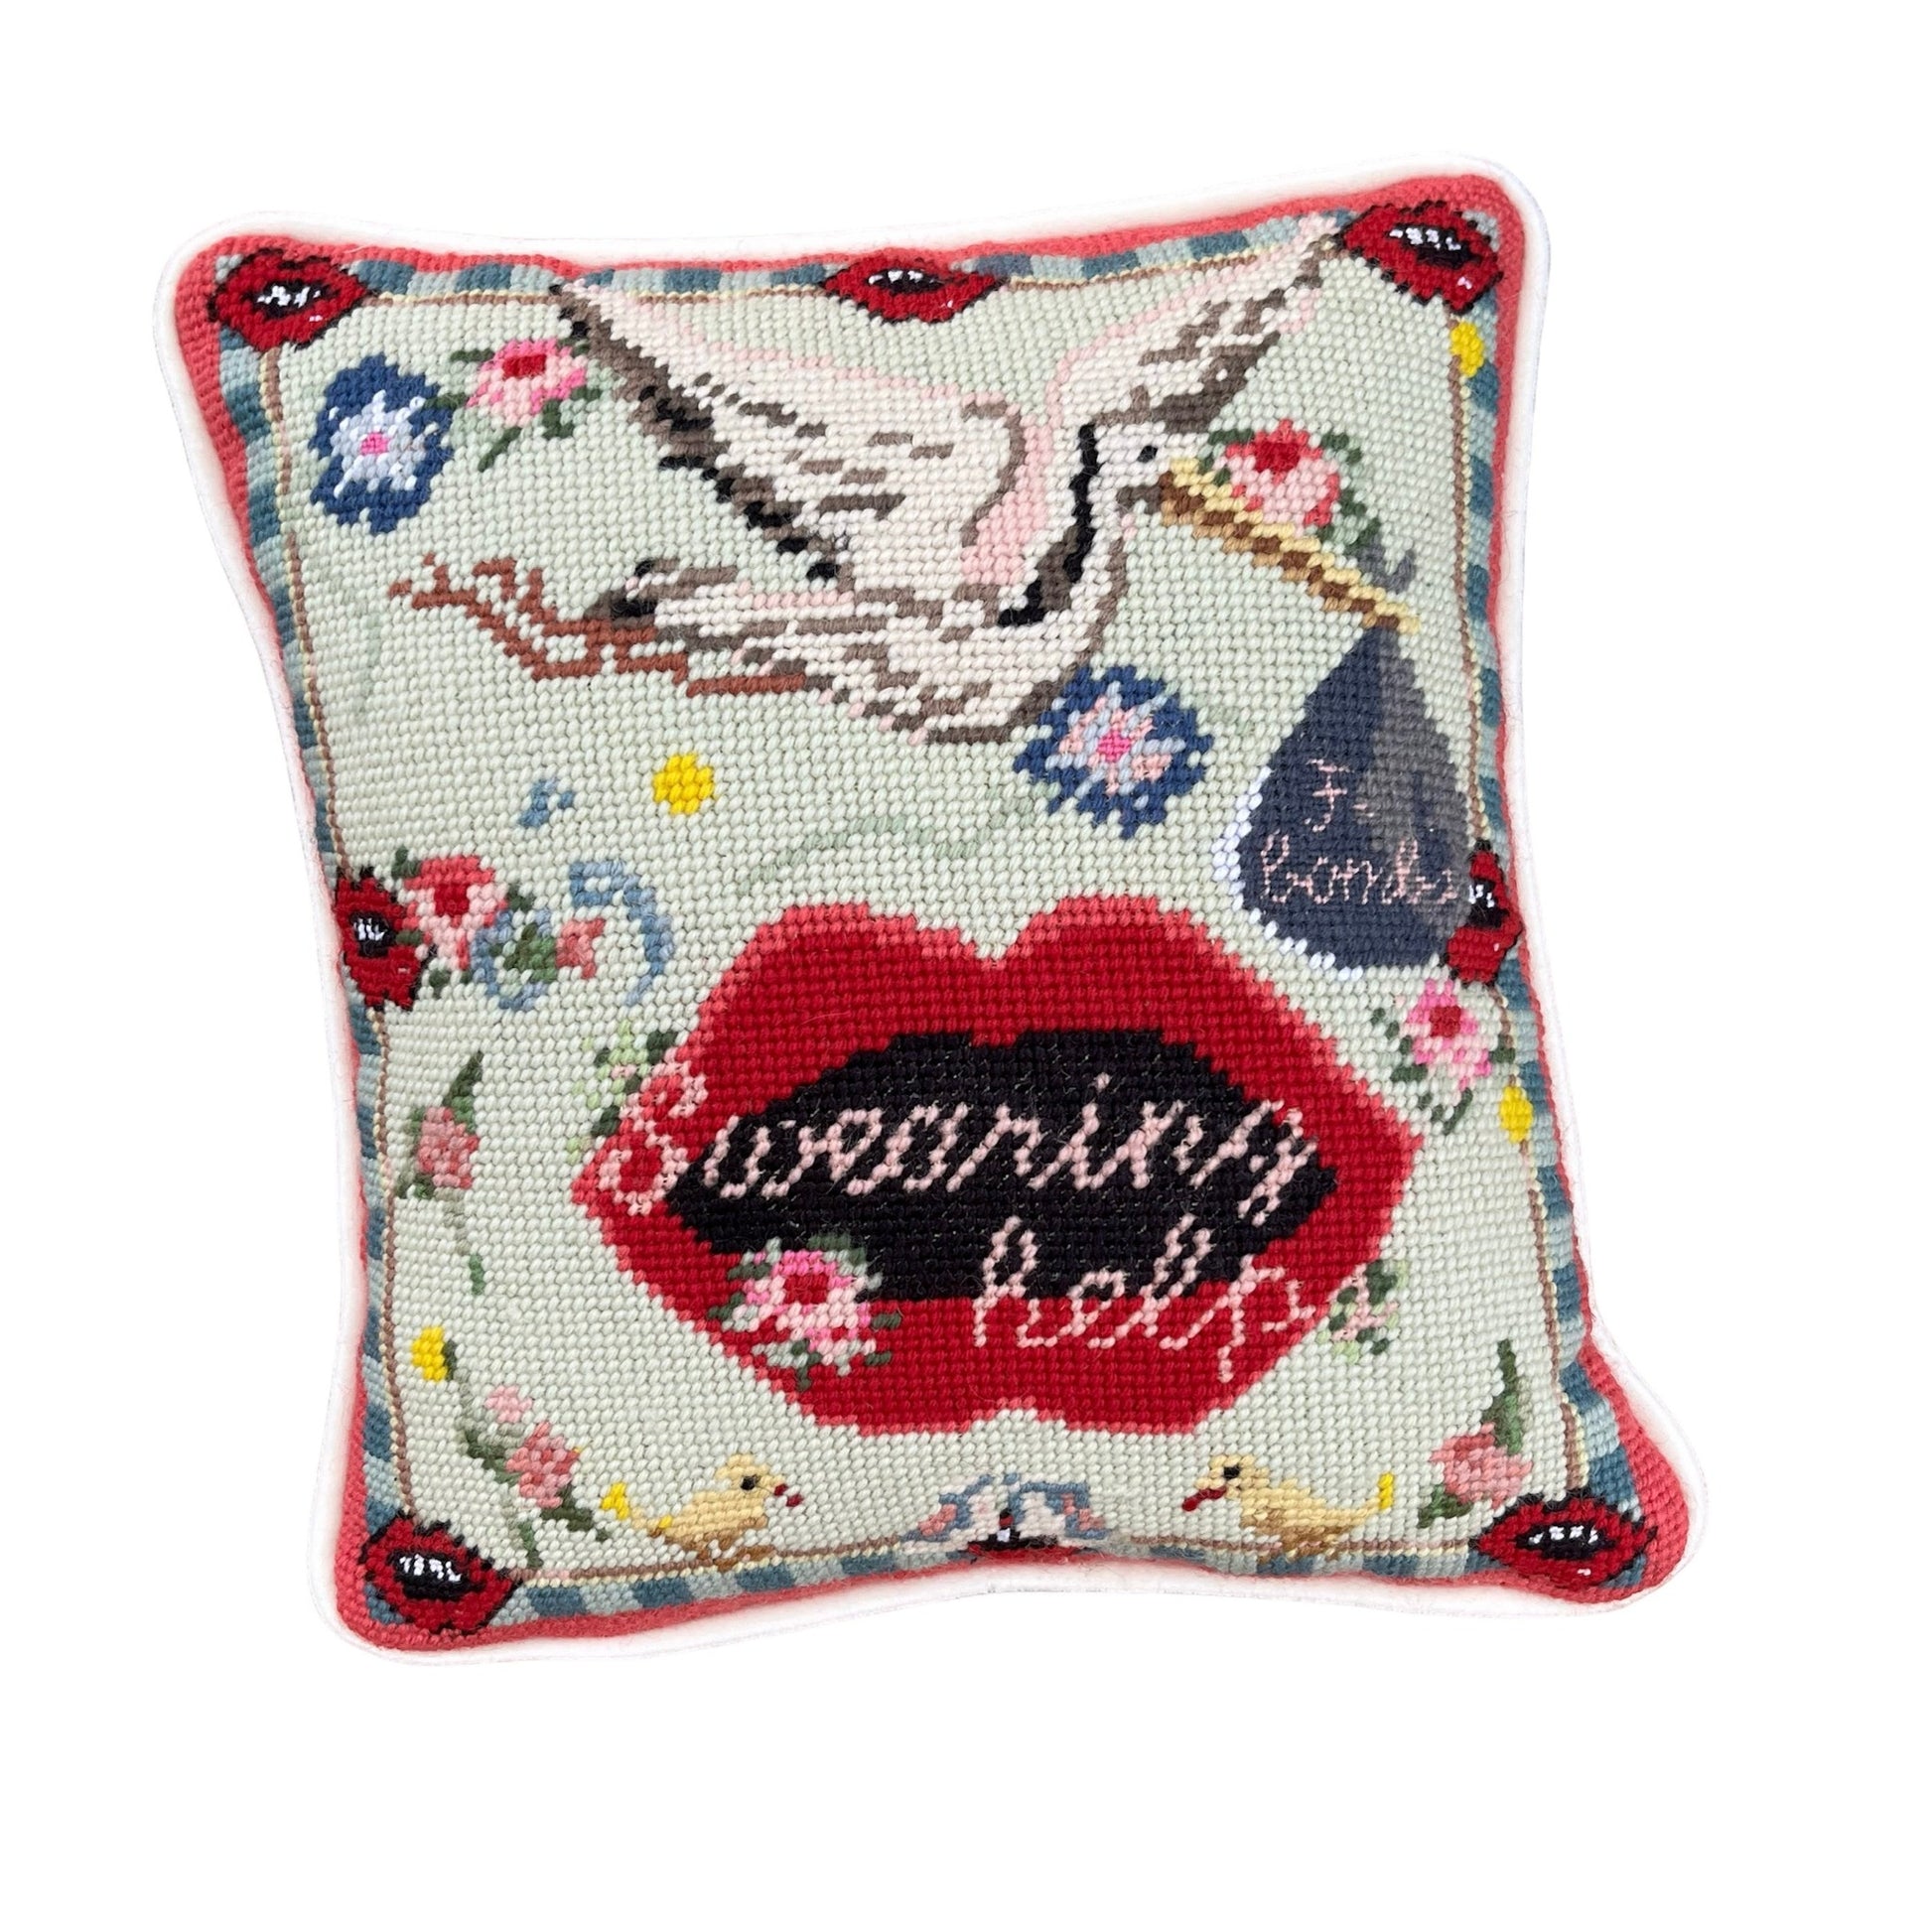 funky needlepoint pillow with stork carrying f-bombs and big lips